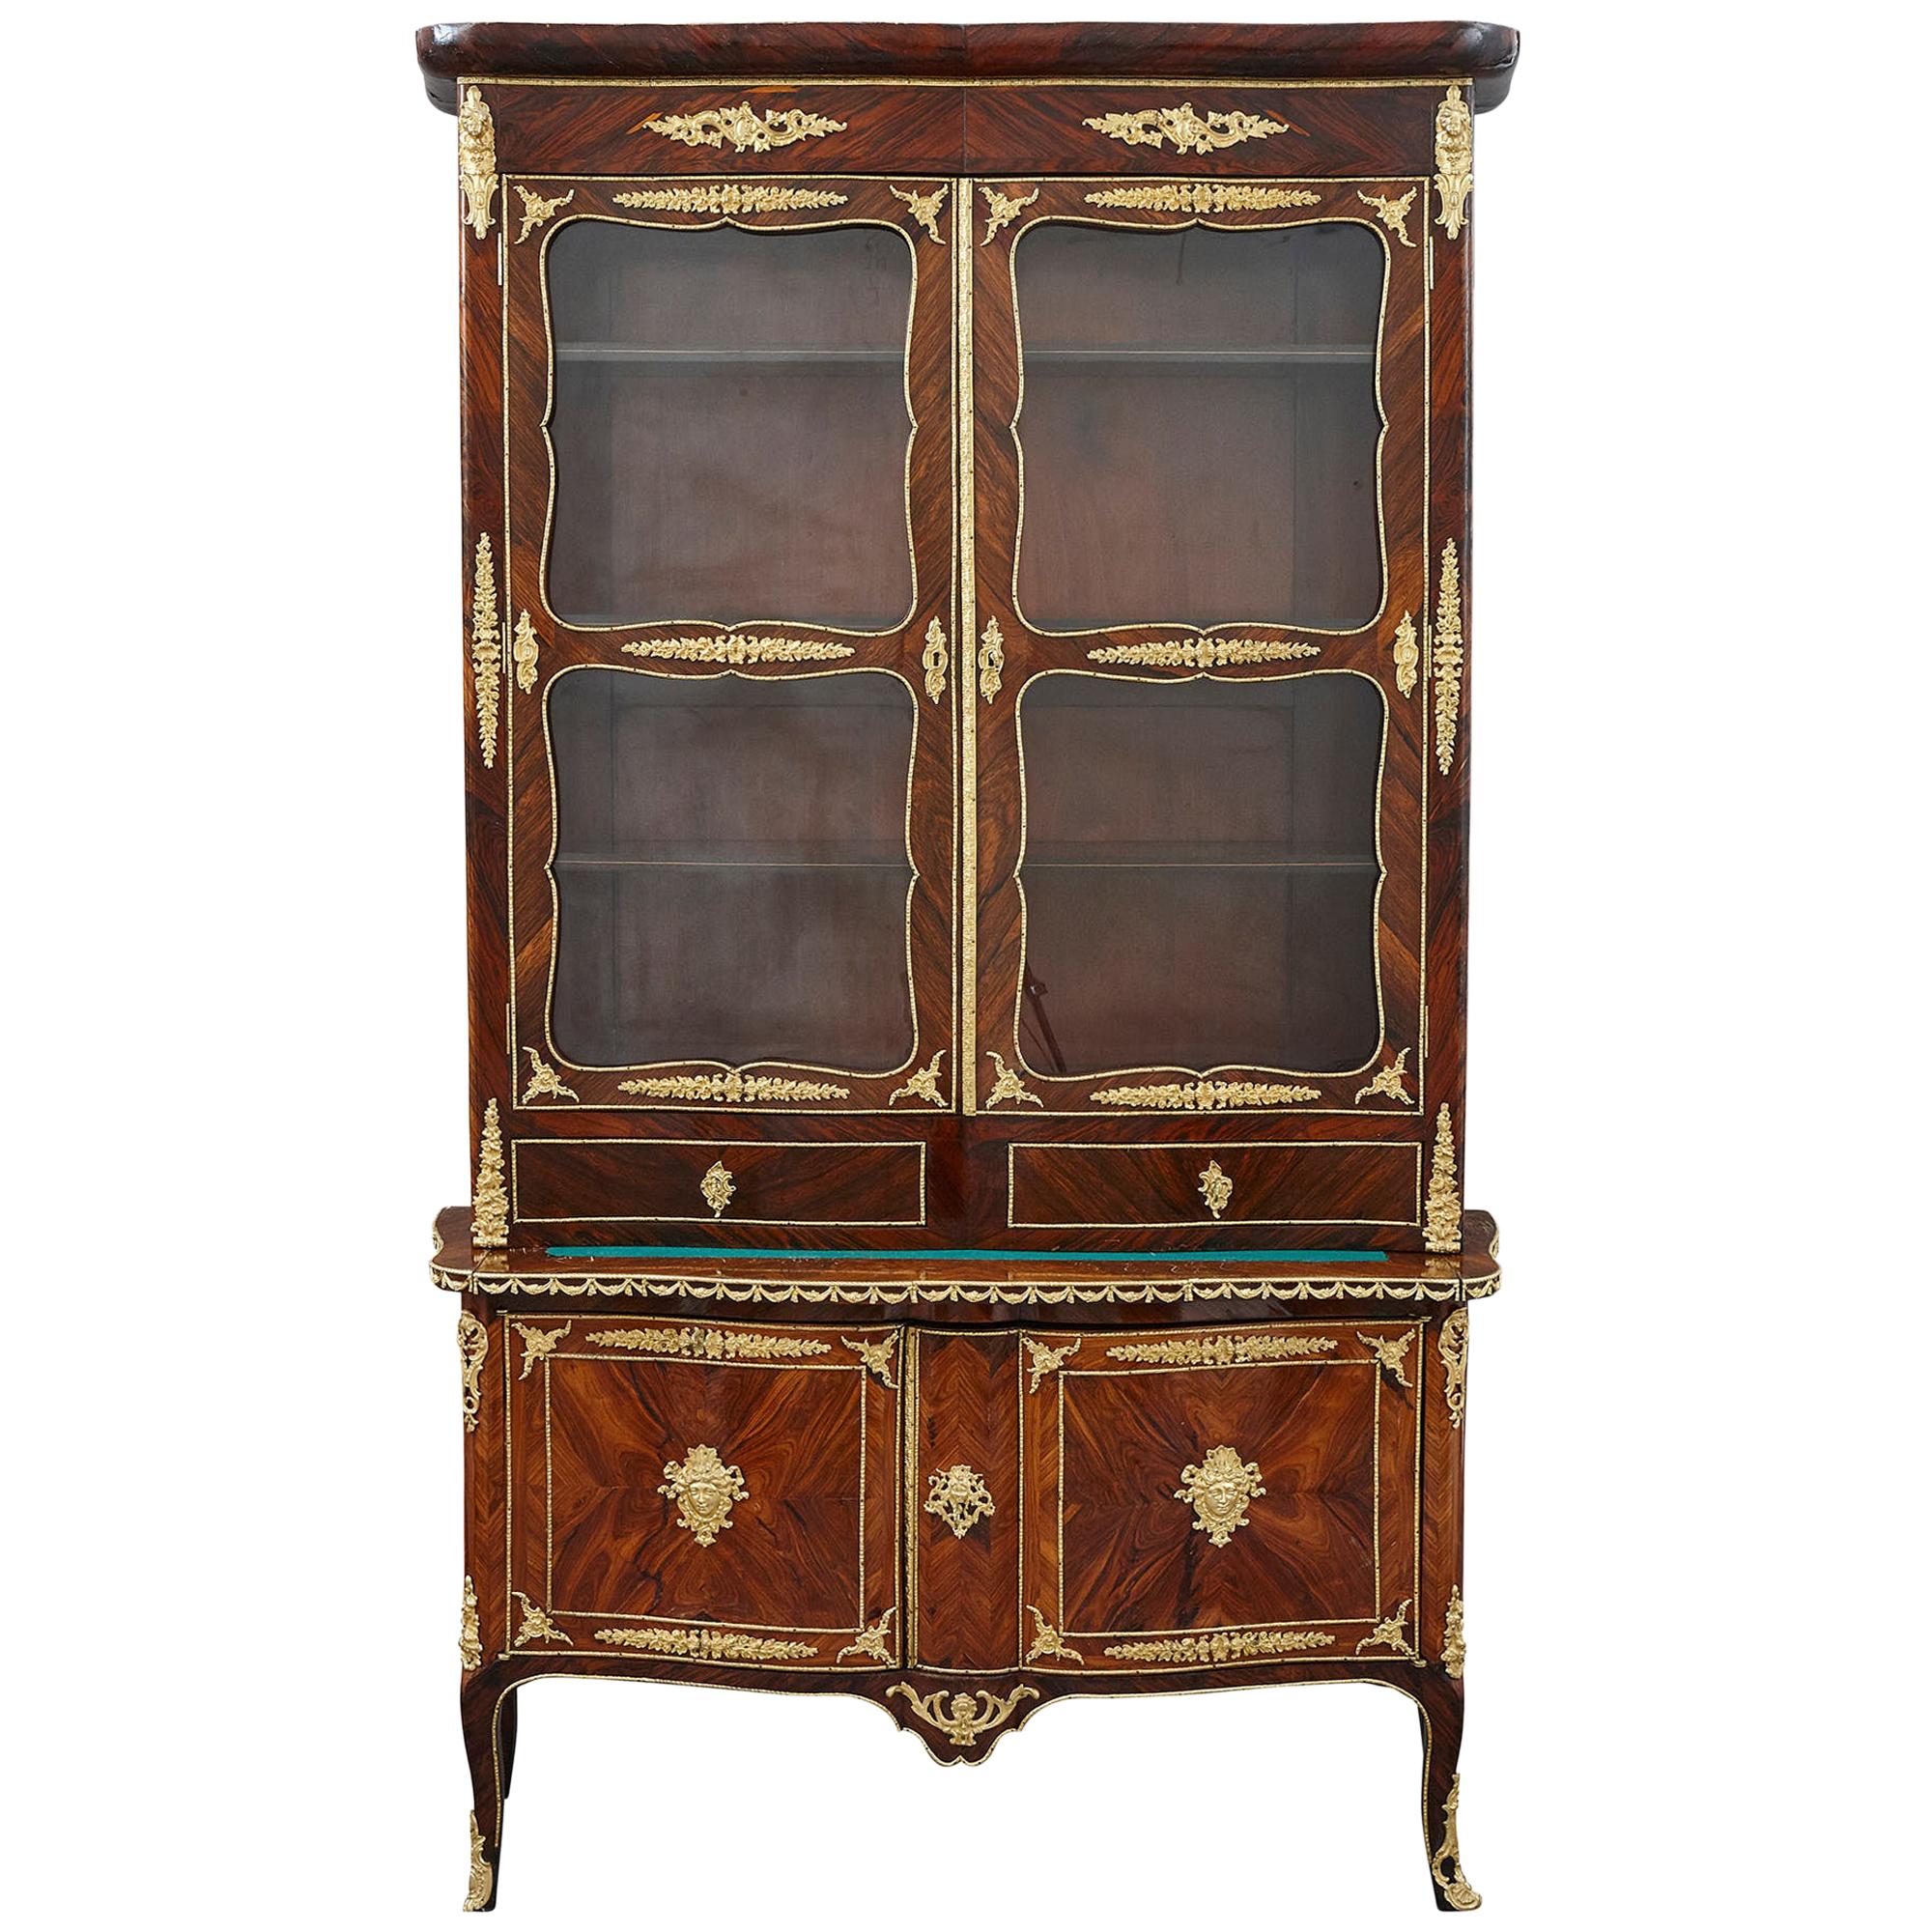 Second Empire Period Gilt Bronze and Kingwood Display Cabinet